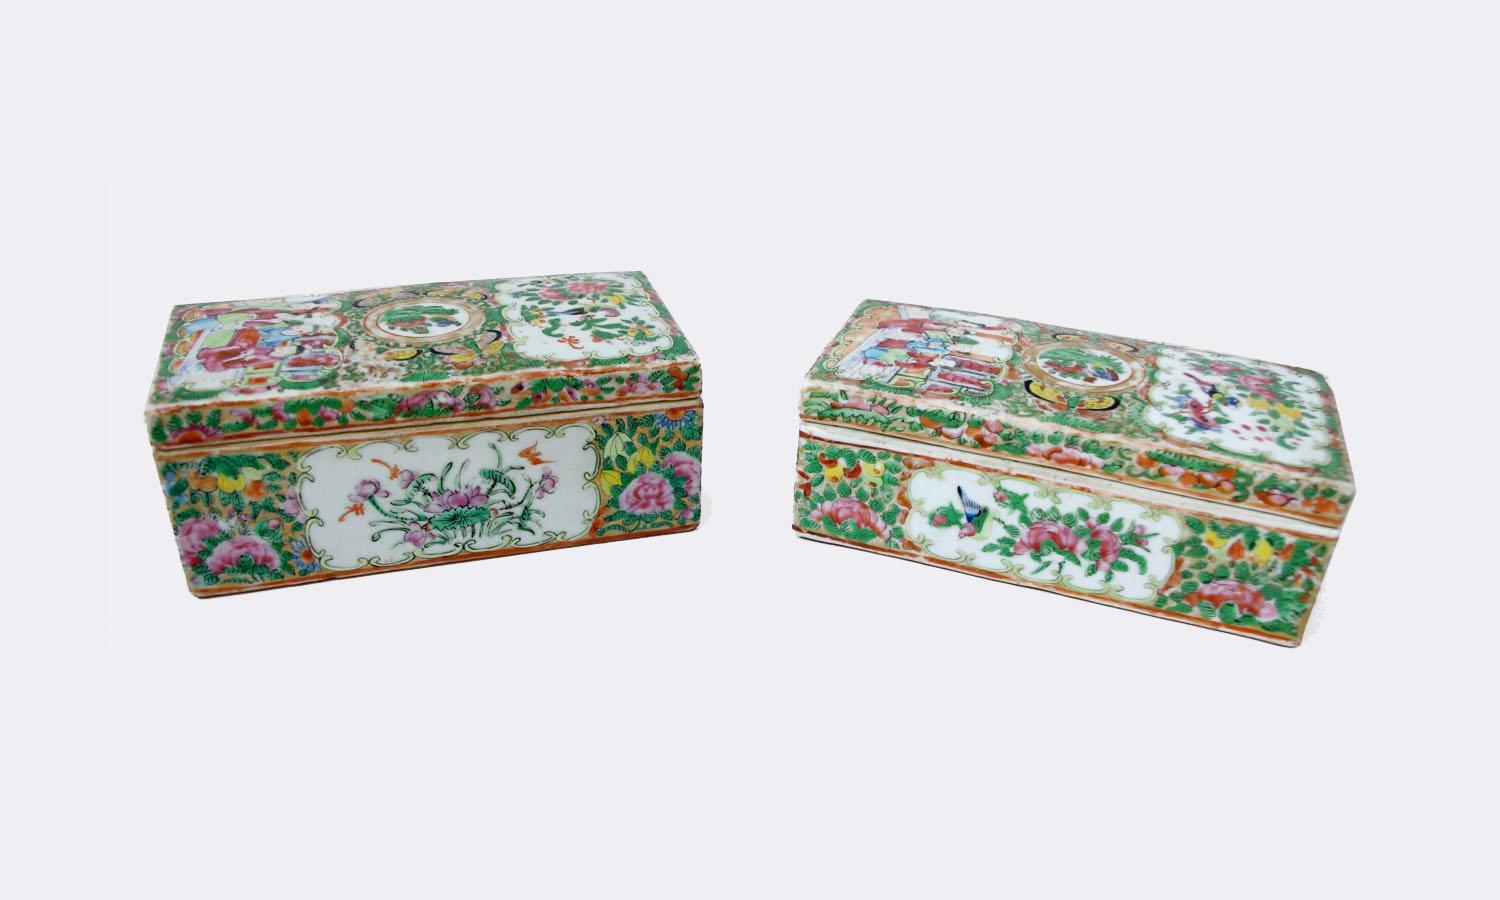 Pair of rectangular Canton porcelain boxes. Polychromic and gold enameled decoration in the green and pink shades and composed of flowers and foliages with bouquets and scenes.
The inside is divided in two lenght wise parts.
Chinese work, made